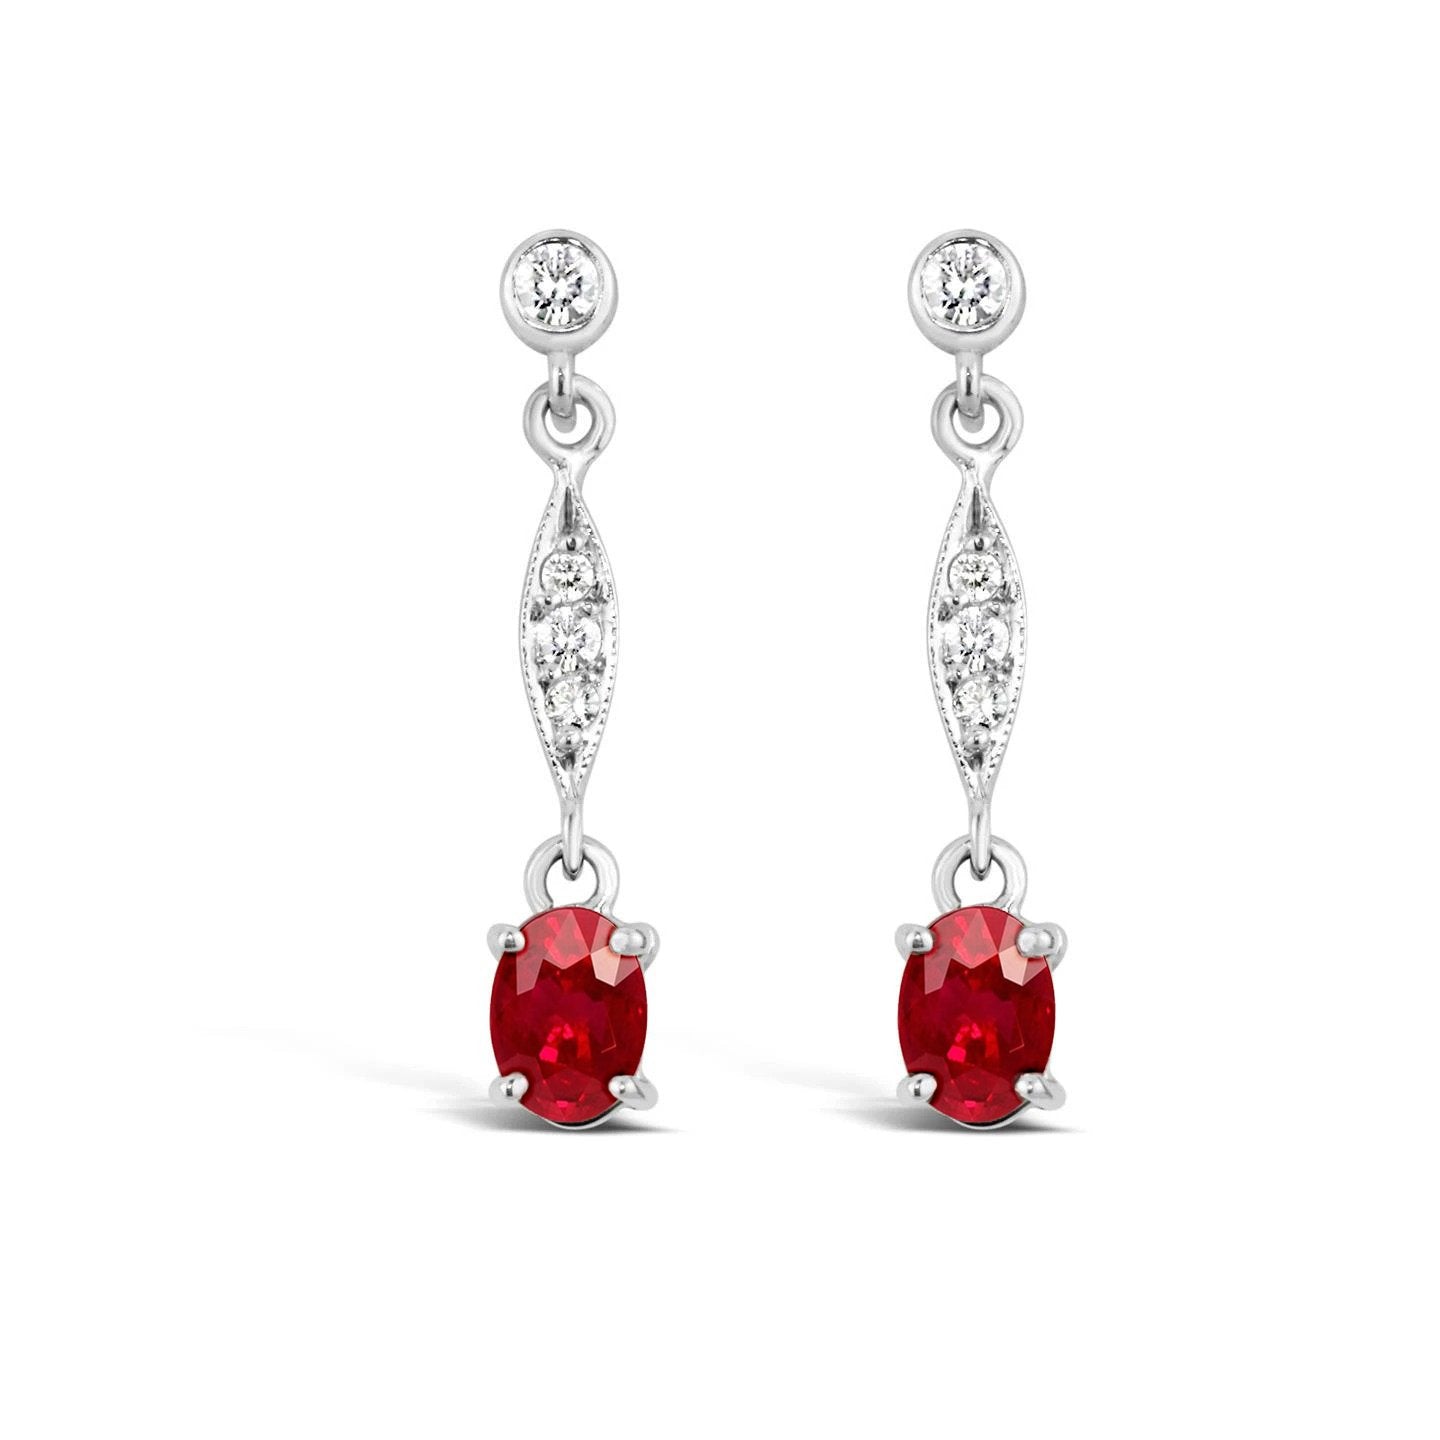 White Gold 14K 4.80 Carats Ruby And Diamonds Studs Earrings New - Gemstone Earring-harrychadent.ca